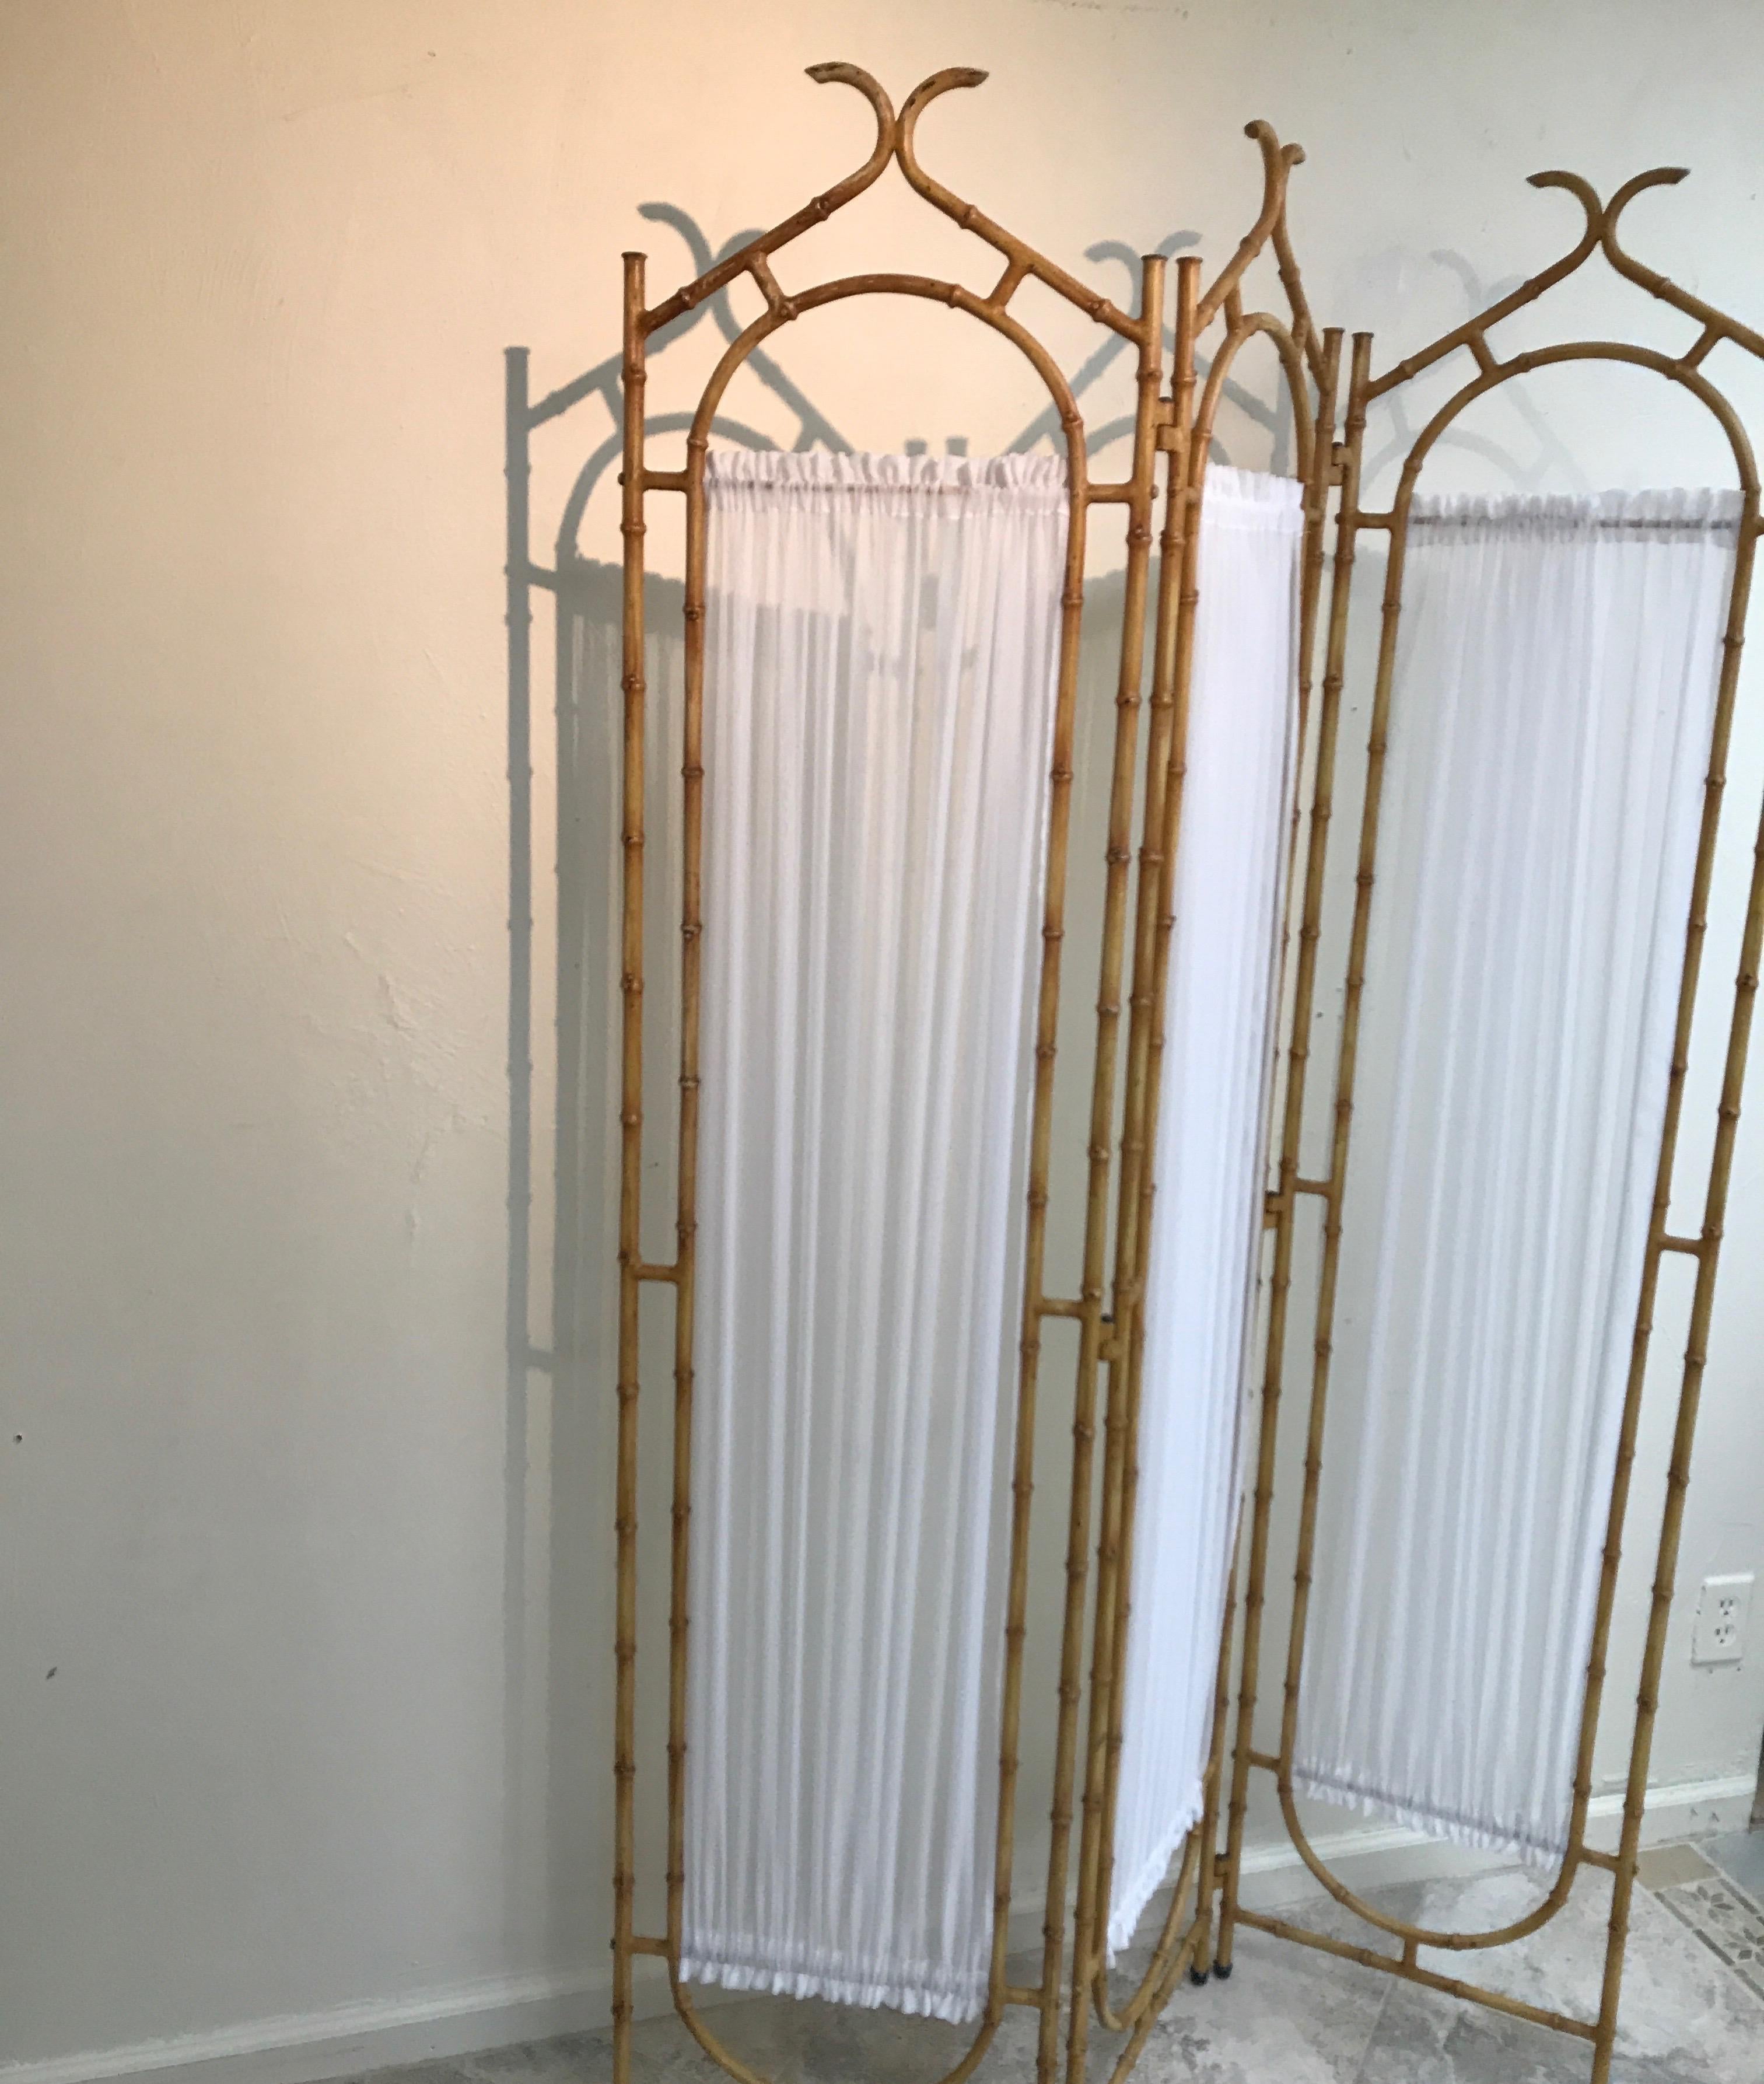 Faux bamboo painted metal pagoda style three-panel screen with white sheer fabric.